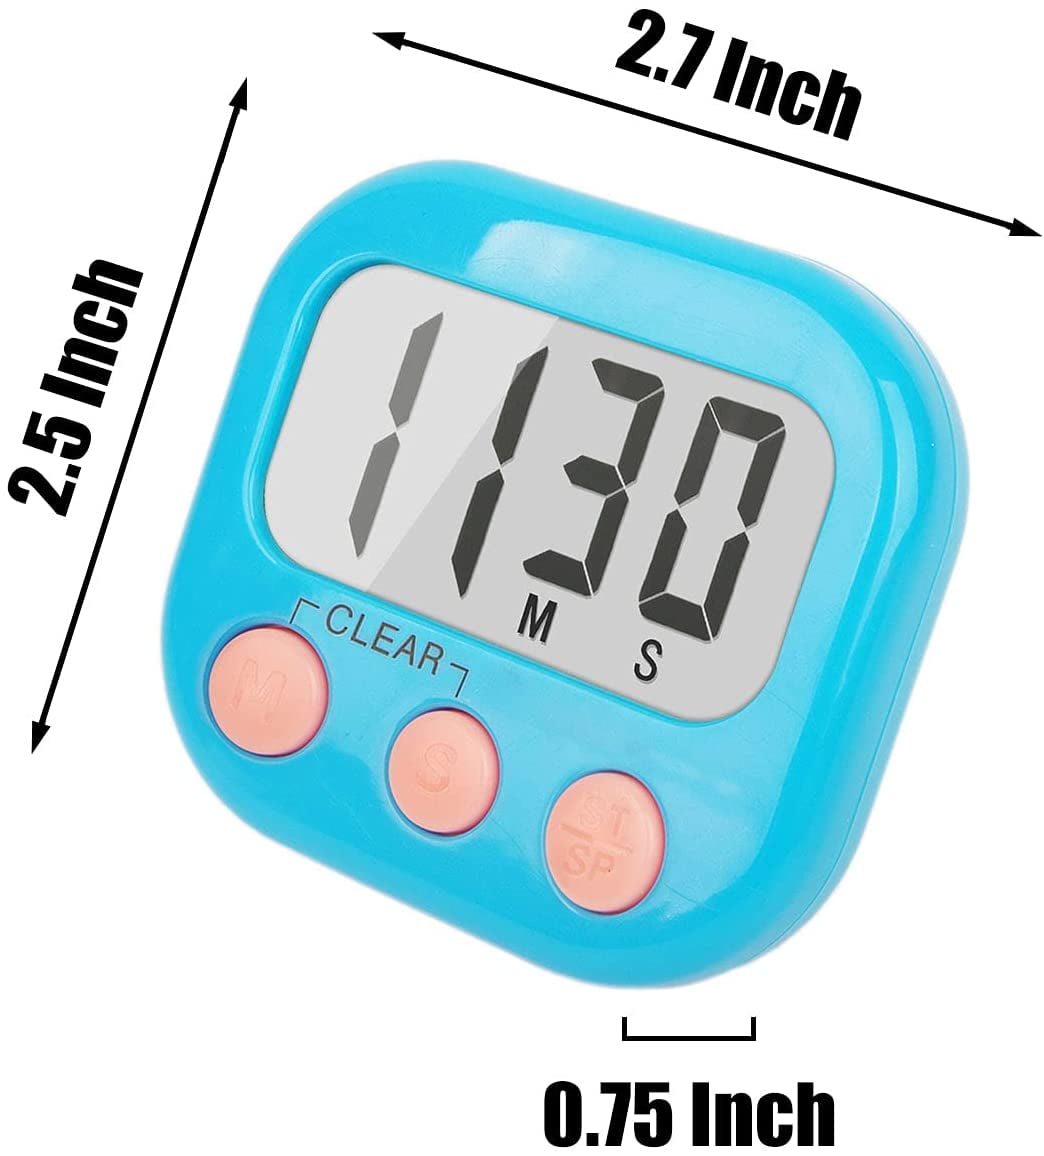 TSV Digital Kitchen Timer, Magnetic Cooking Timer with Count Up Count Down  Big Digits Large Display Loud Alarm Back Stand